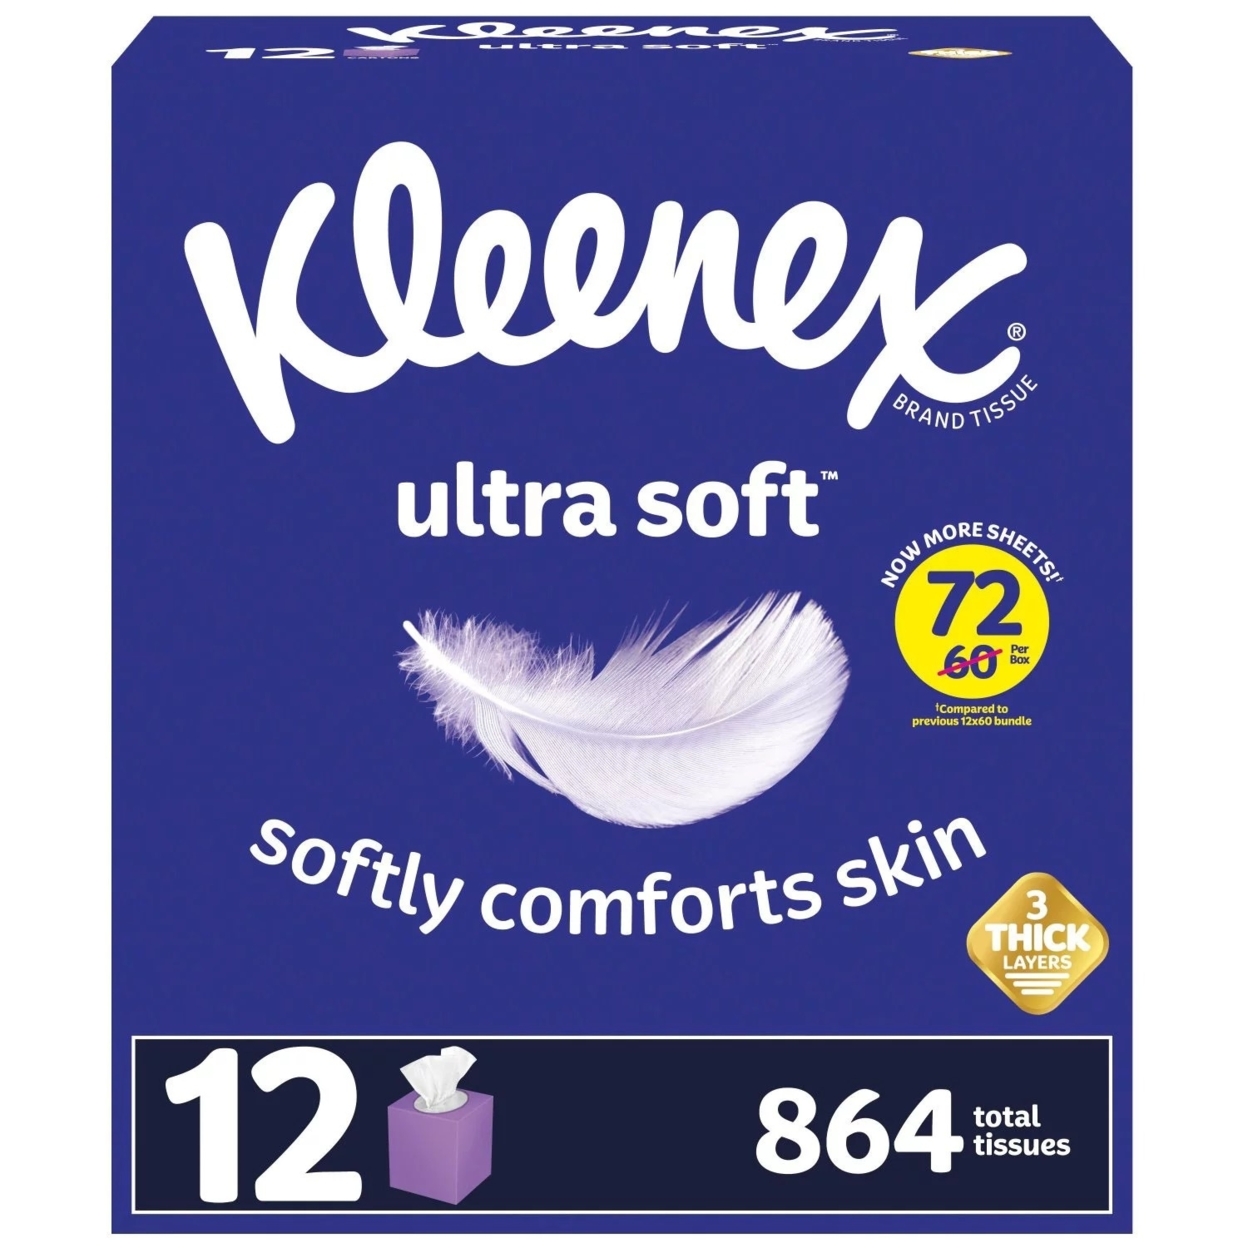 Kleenex Ultra Soft 3-Ply Facial Tissues, Cube Boxes (72 Tissues/Box, 12 Boxes)